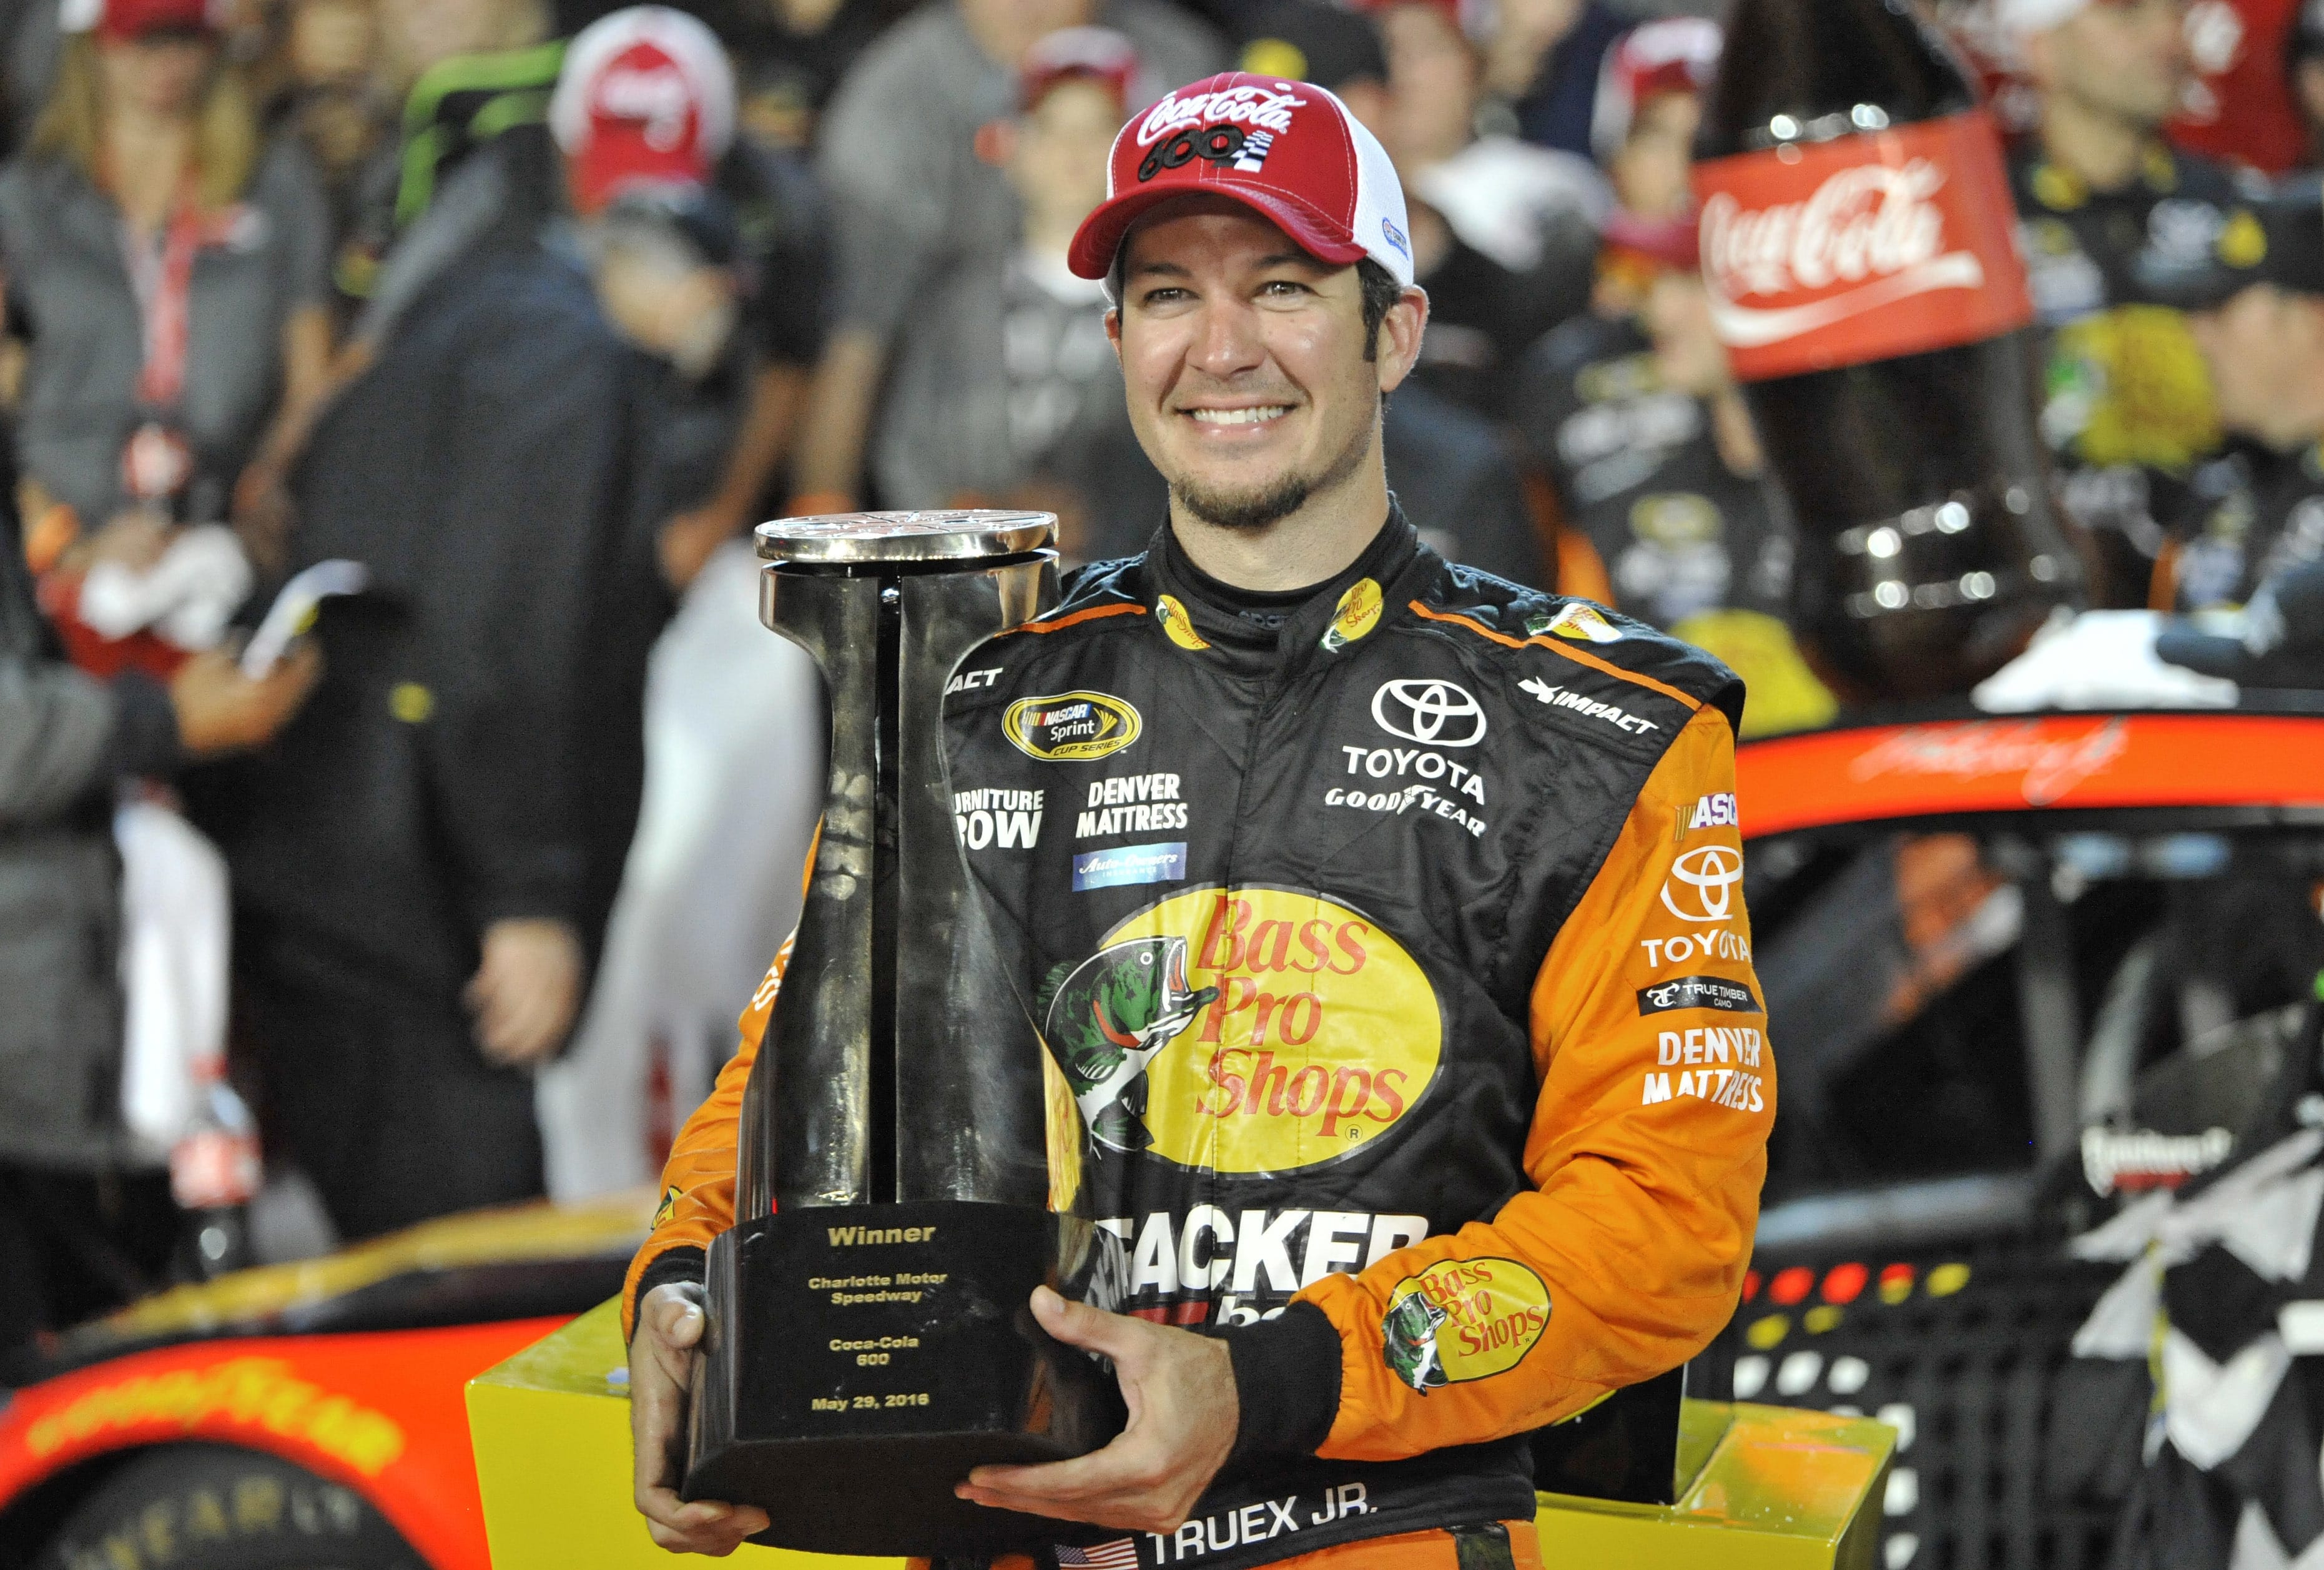 Martin Truex Jr. poses with the trophy after winning the NASCAR Coca-Cola 600 at Charlotte Motor Speedway in Concord, N.C., Sunday, May 29, 2016.